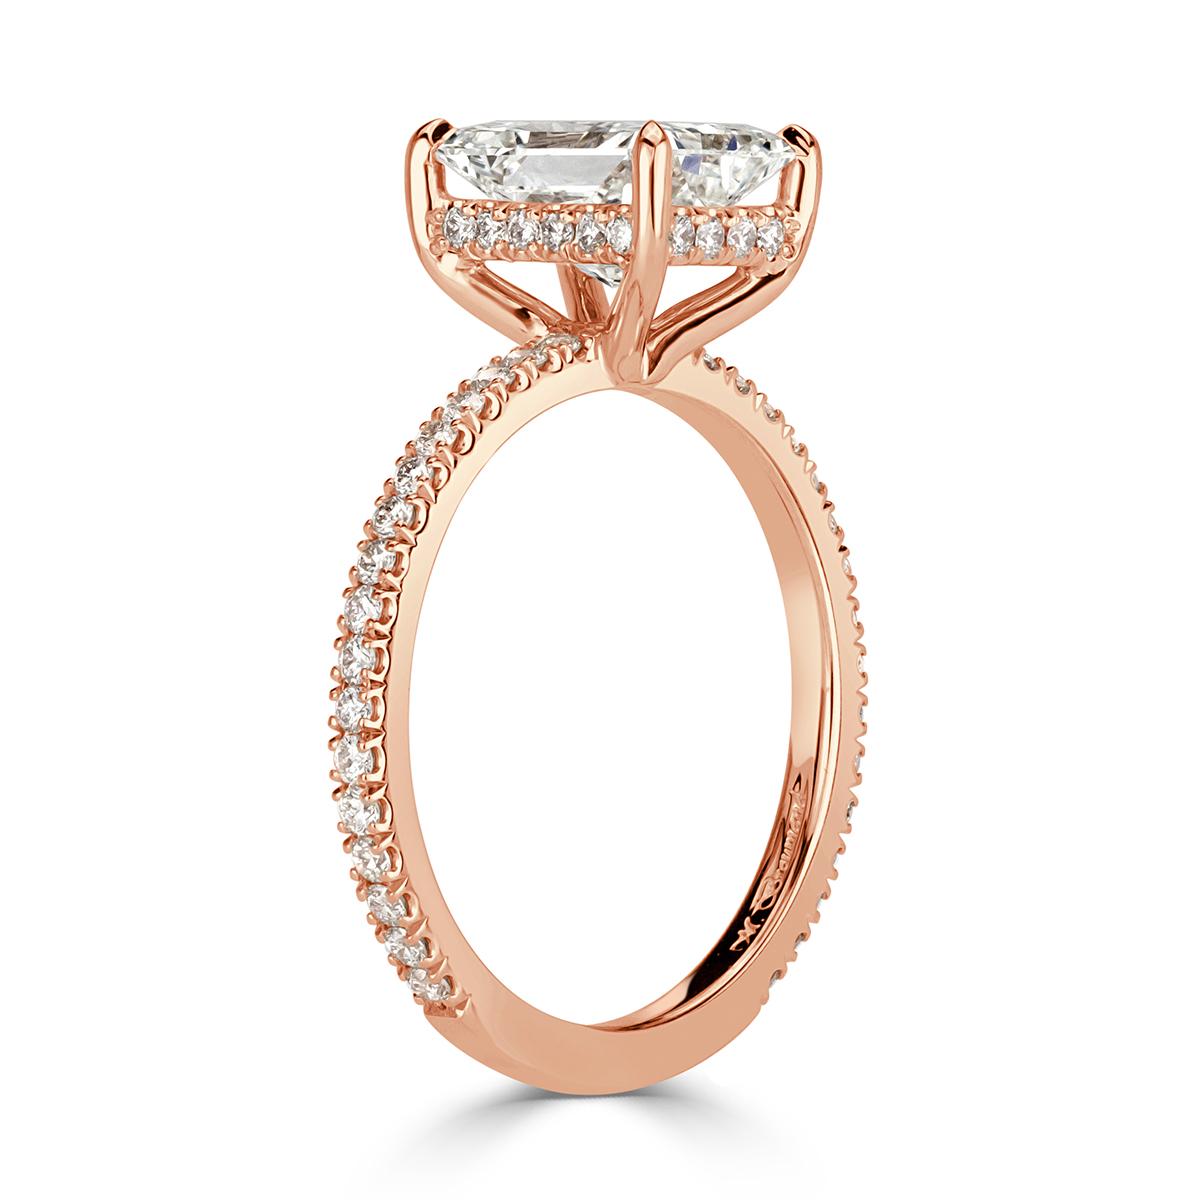 Extraordinarily brilliant and beautiful, this stunning radiant cut diamond engagement ring features a 2.00ct center diamond, GIA certified at H in color, VS2 in clarity. It is graded at excellent in both polish and symmetry in addition of having